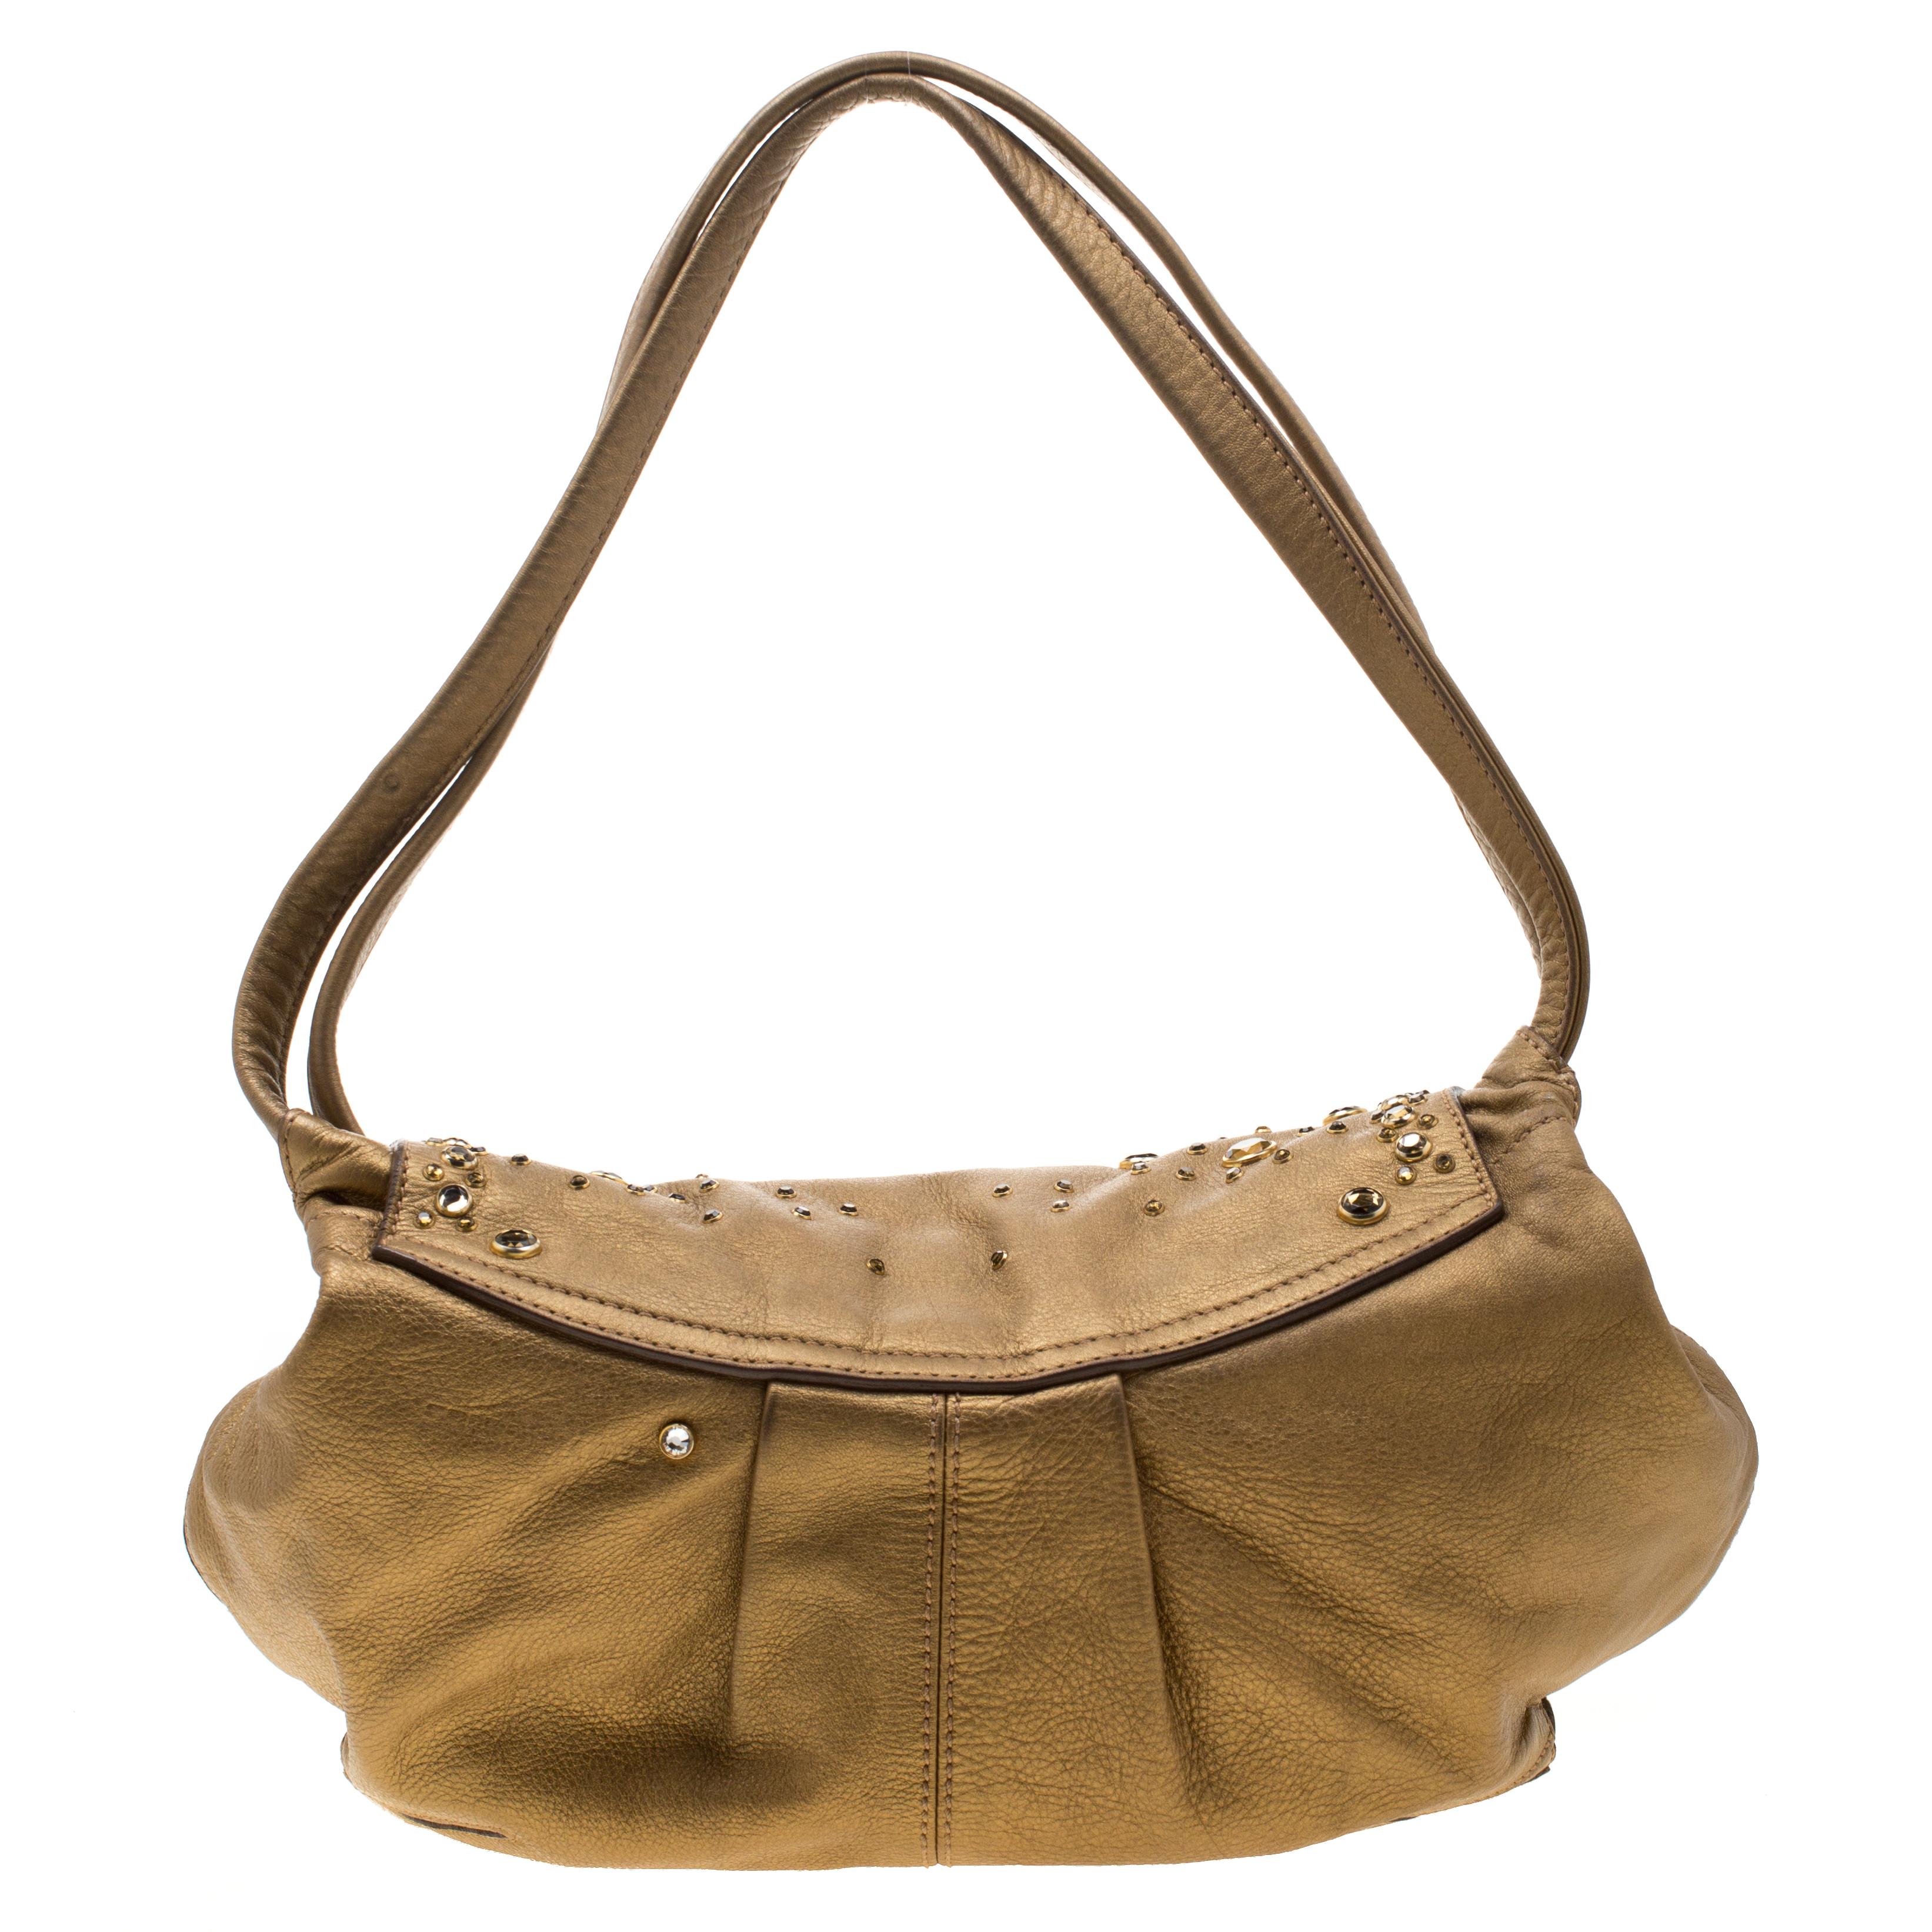 This chic and feminine bag in beige is from Sonia Rykiel. The bag is crafted from metallic gold leather and features a studded flap that opens up to a fabric-lined interior sized to fit your daily essentials. The bag is equipped with shoulder straps